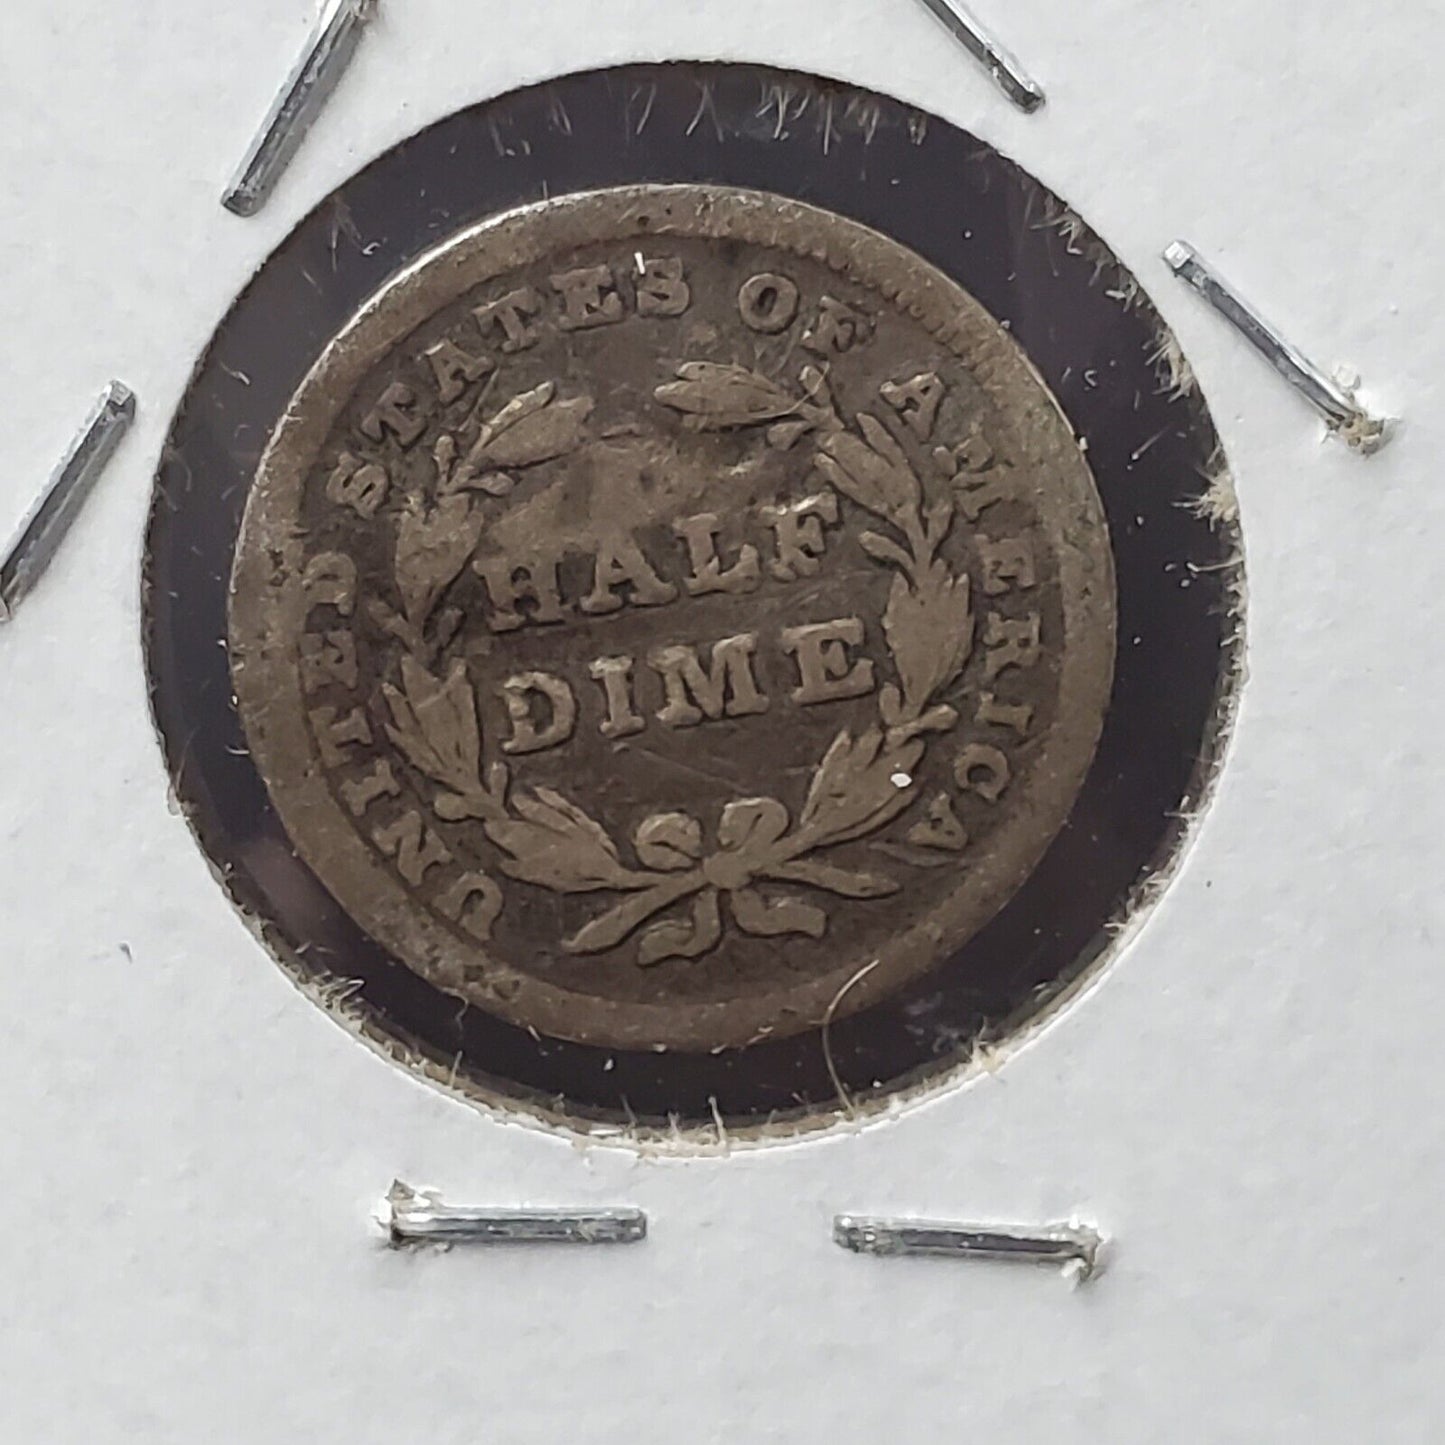 1837 P Seated Liberty Silver Half Dime Coin Small Date Variety Good / VG Details